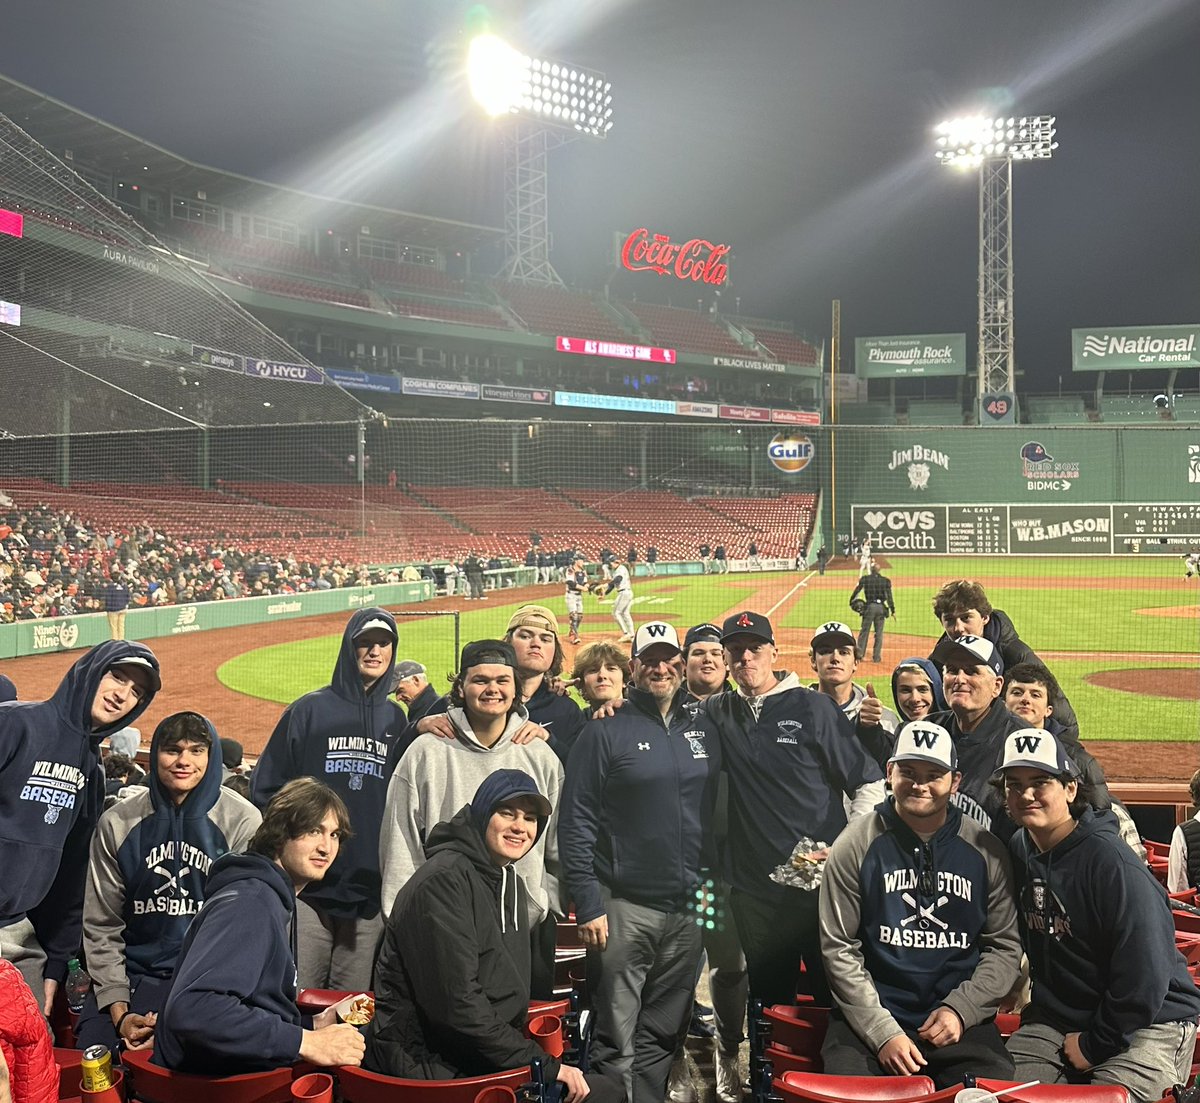 Great night at Fenway with @WHS_Baseball978 supporting ALS awareness with @BCBirdBall @Wilmington_AD @jfboyle22 @carlbeatrice10